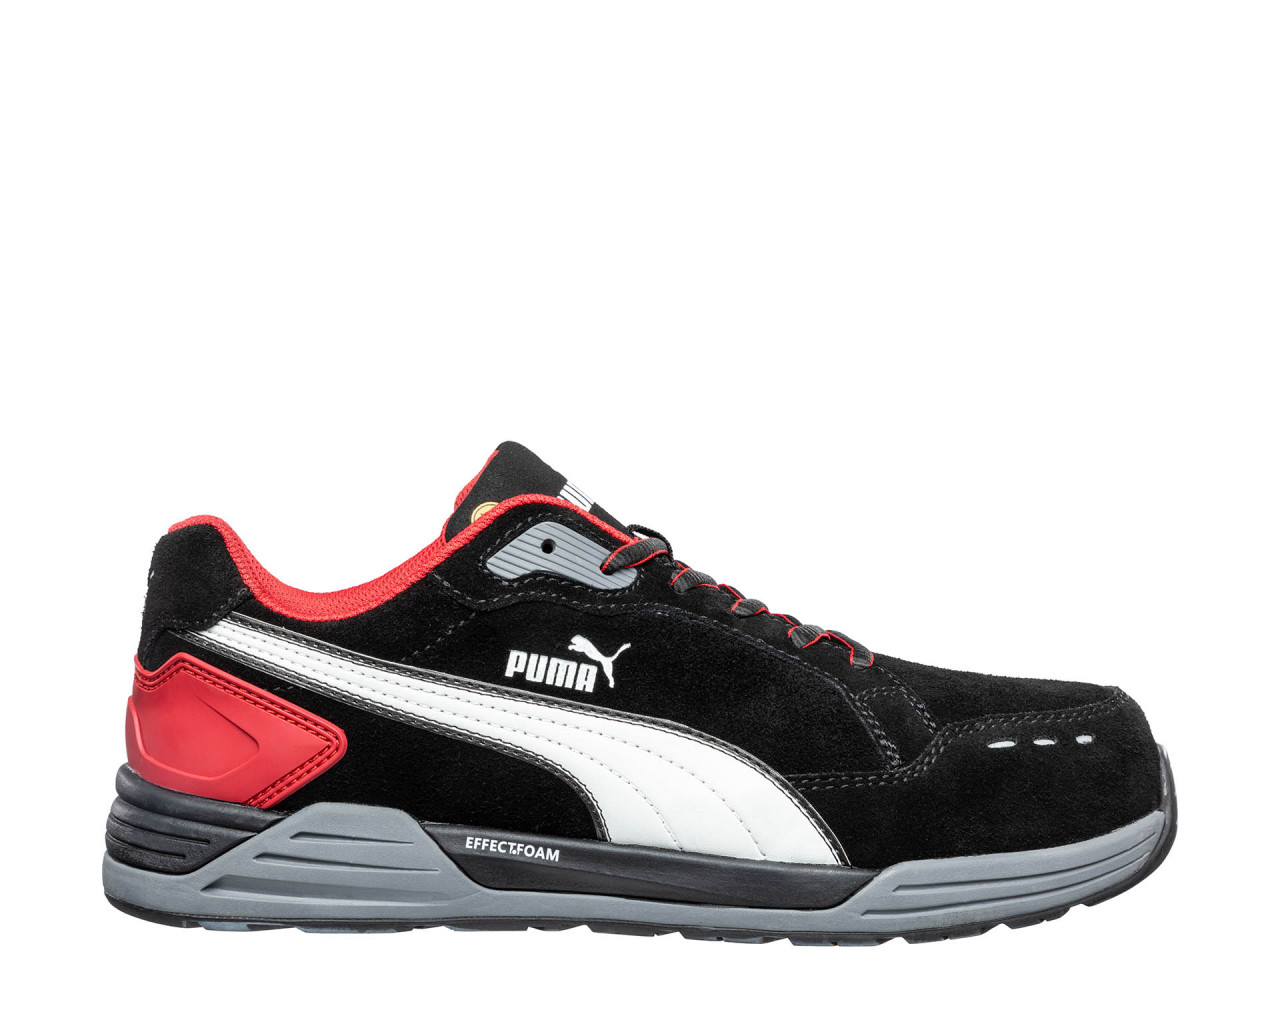 PUMA SAFETY safety Safety English | LOW shoes AIRTWIST SRC BLK/RED ESD HRO S3 Puma